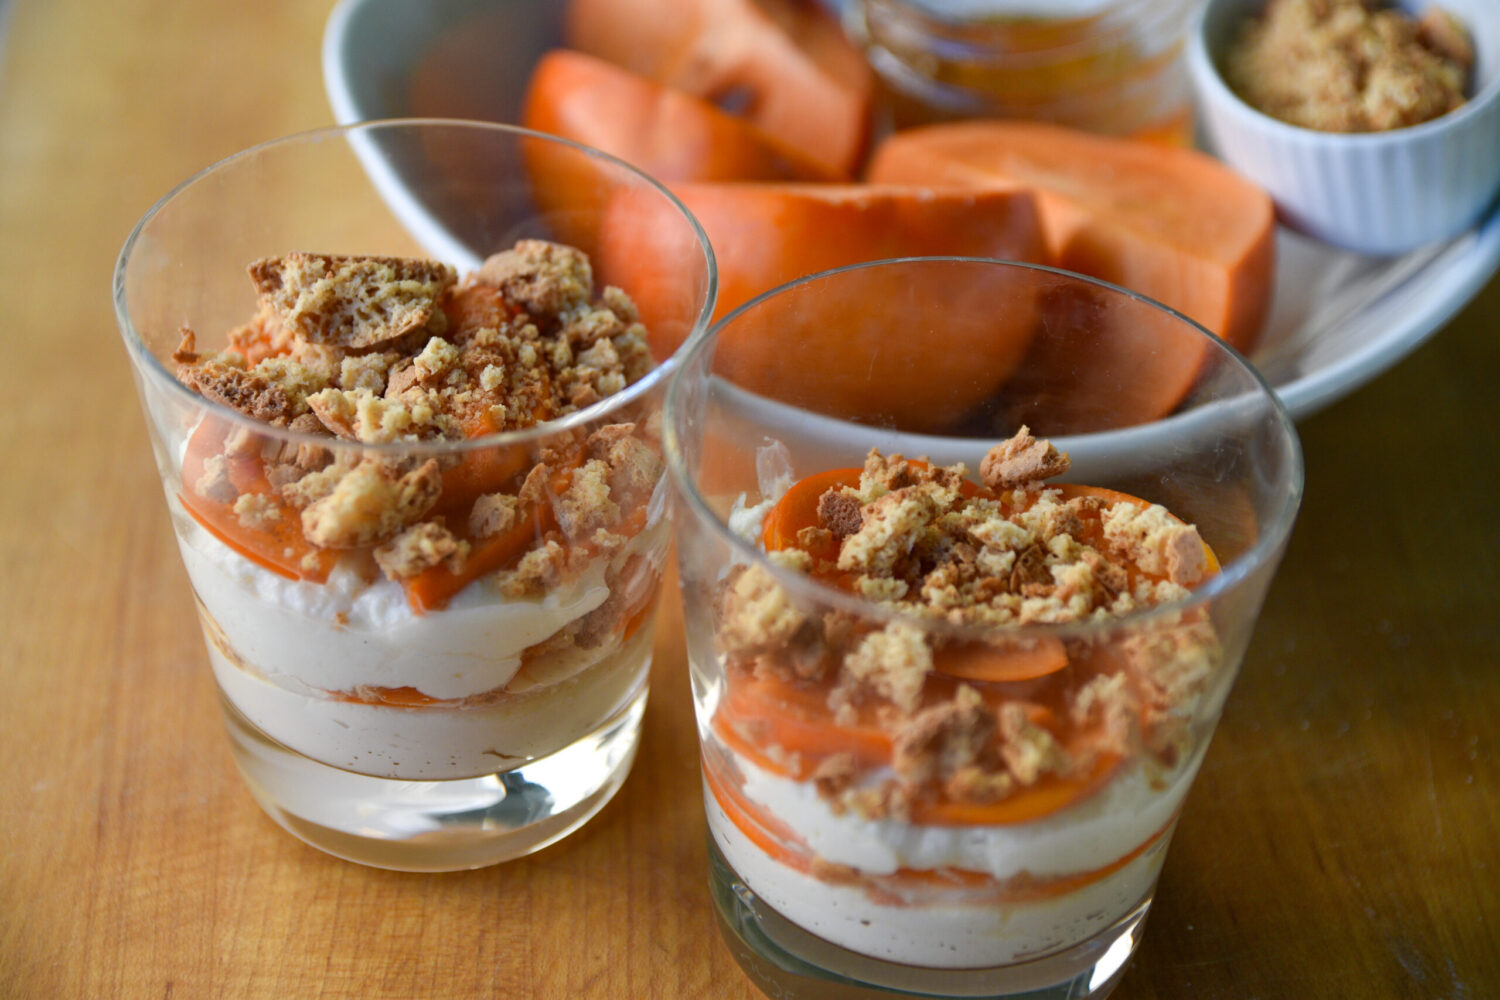 Ricotta Trifle, topped with persimmon slices and crumbled cookies, served in clear cups on a wooden cutting board.